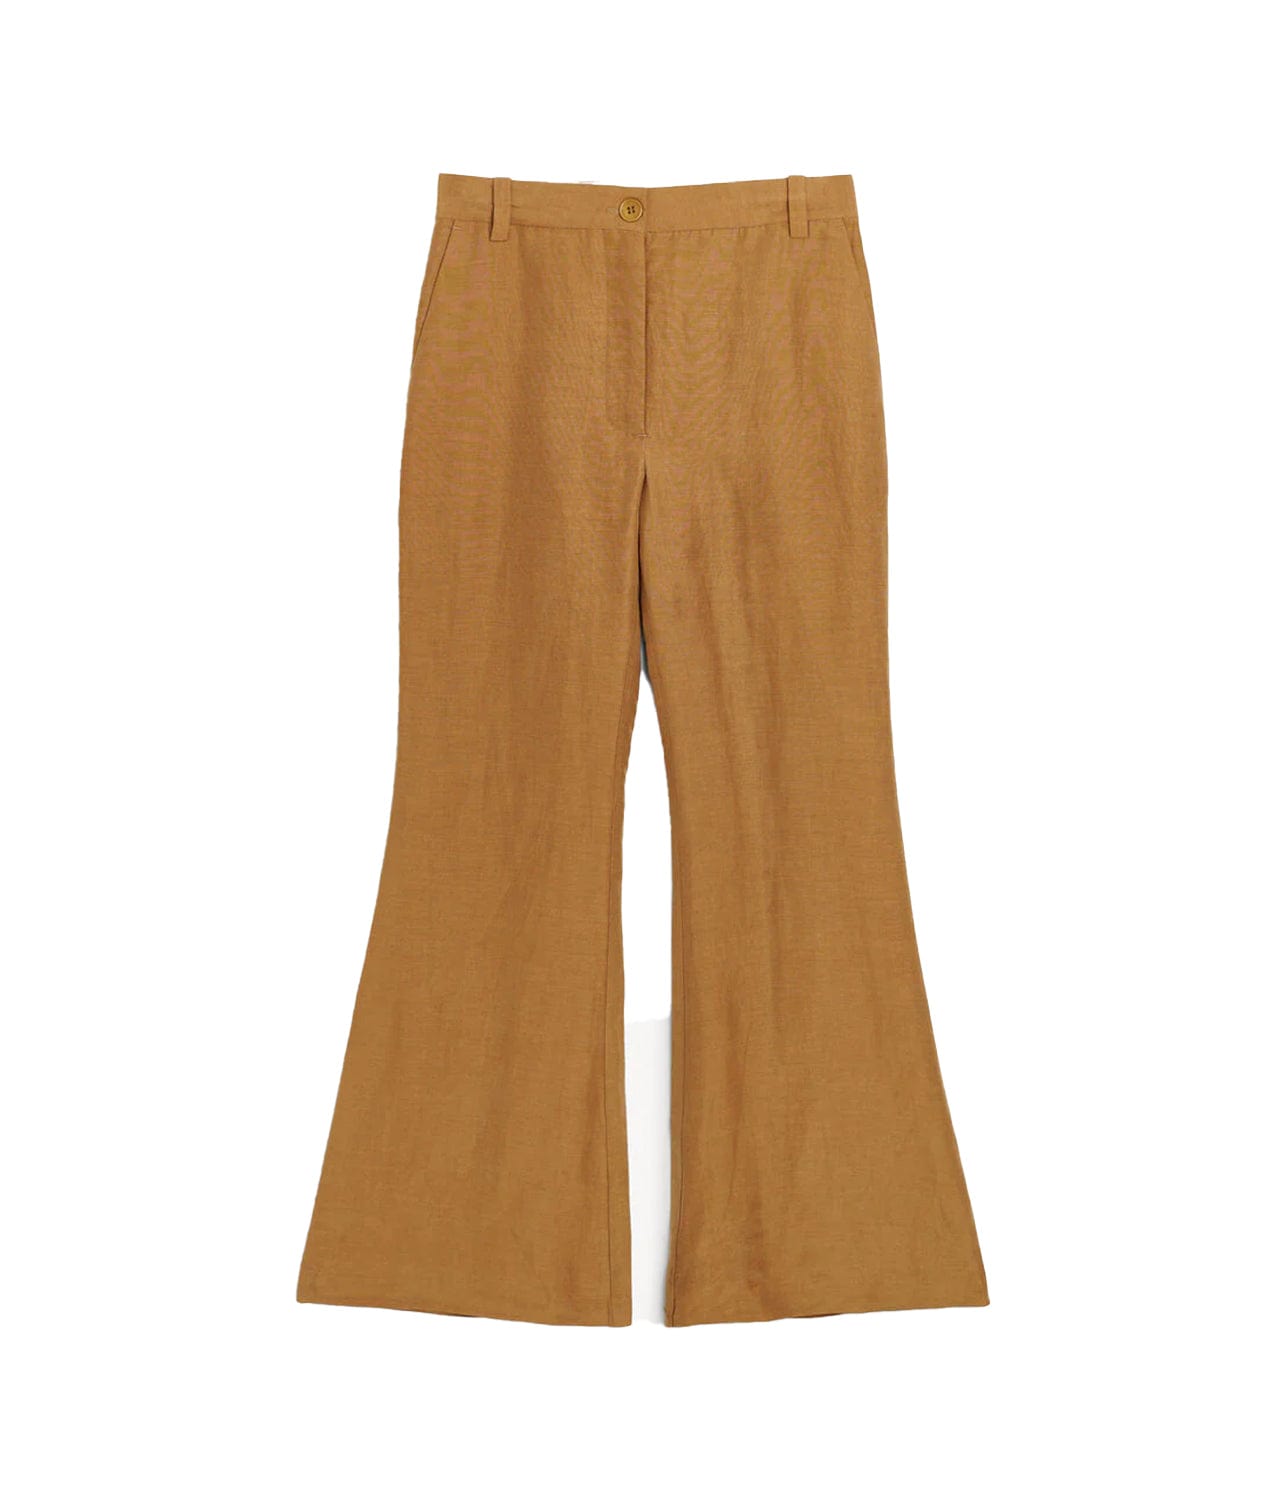 CARASS PANTS- TOBACCO | BY MALENE BIRGER | BY MALENE BIRGER CARASS PANTS- TOBACCO